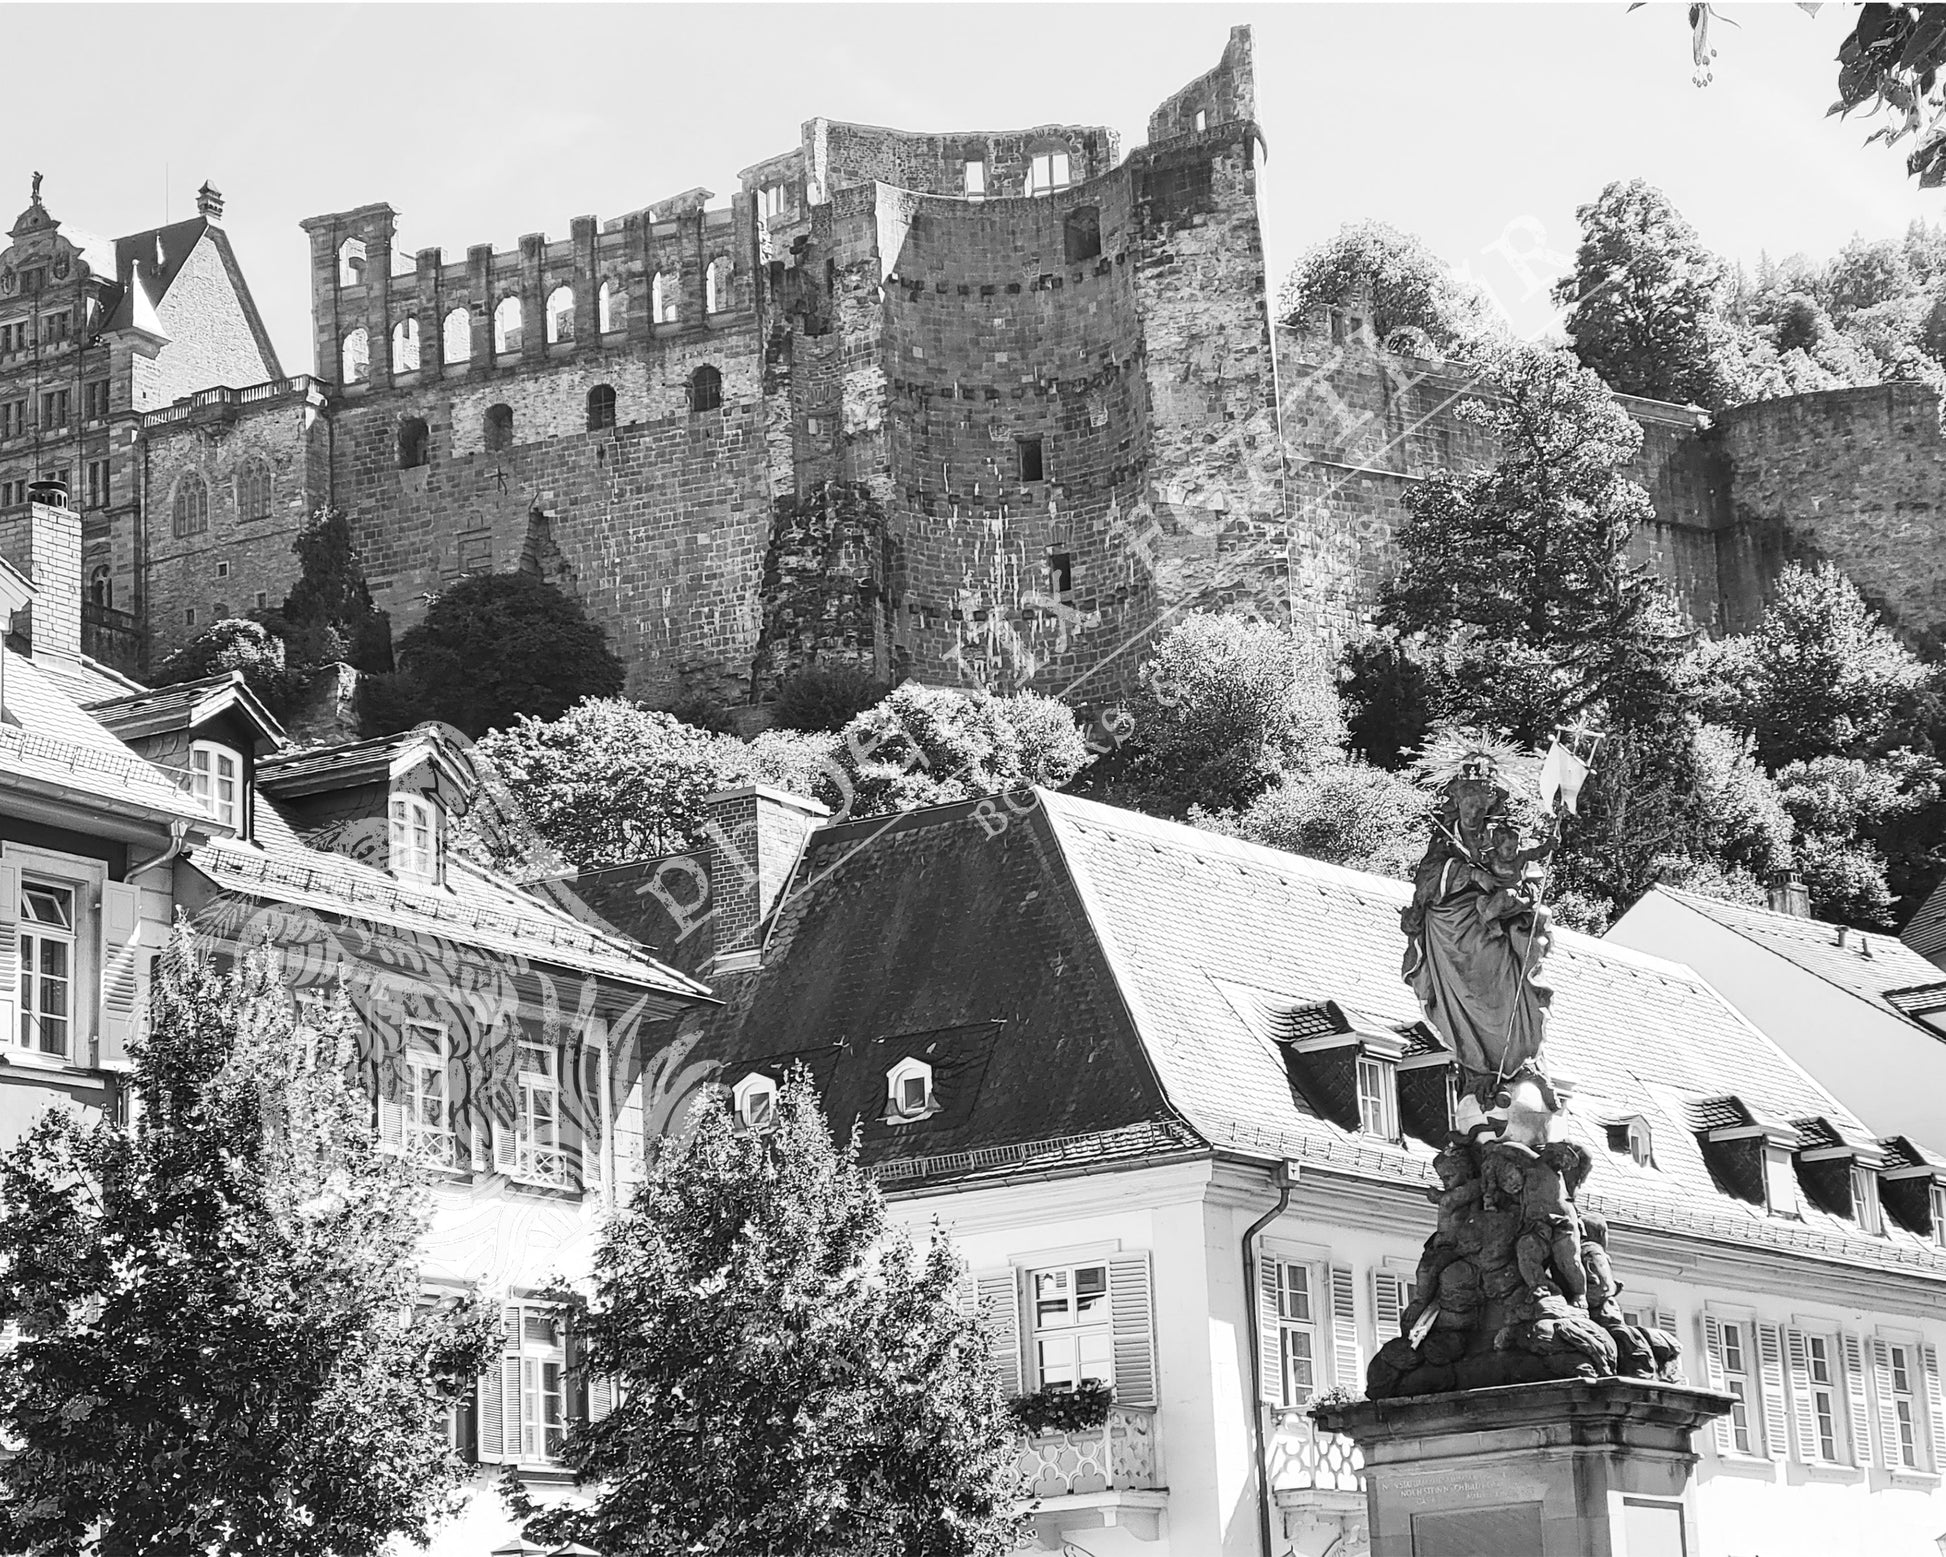 Travel photography. Gifts for history lovers and travelers. A dramatic black and white travel photograph from the Kornmarkt square in Heidelberg, Germany, looking up at the Heidelberg Palace (Schloss Heidelberg).